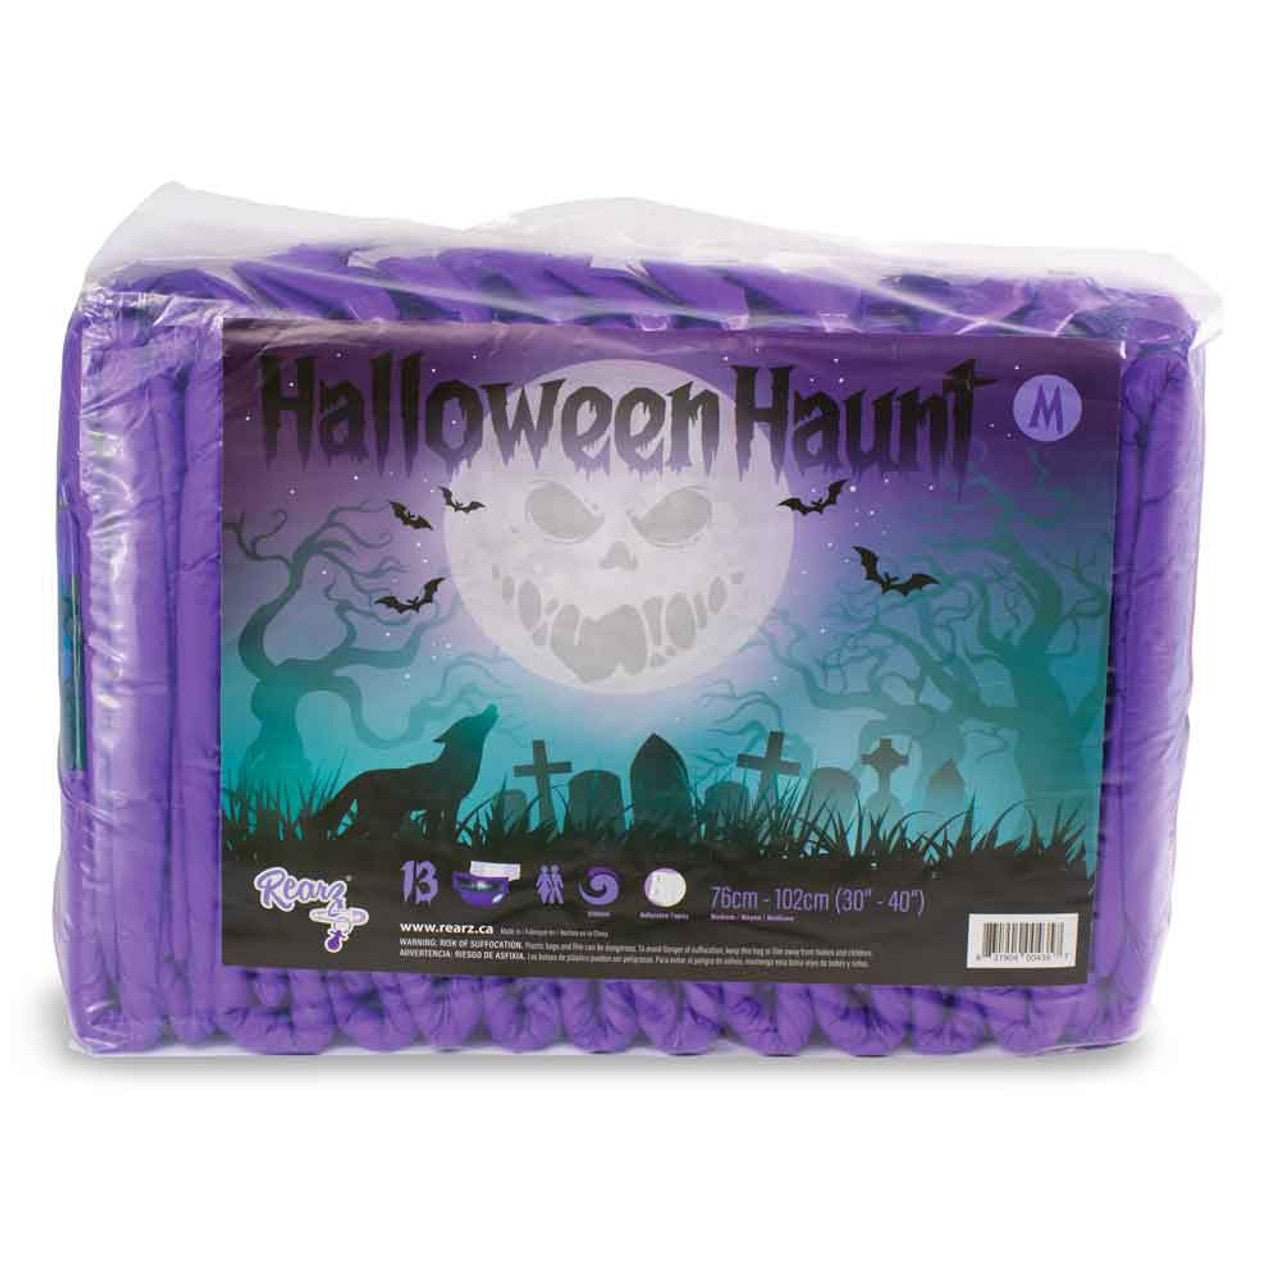 Rearz Halloween Haunt Adult Diapers/Size M/2 Piece/FREE SHIPPING!